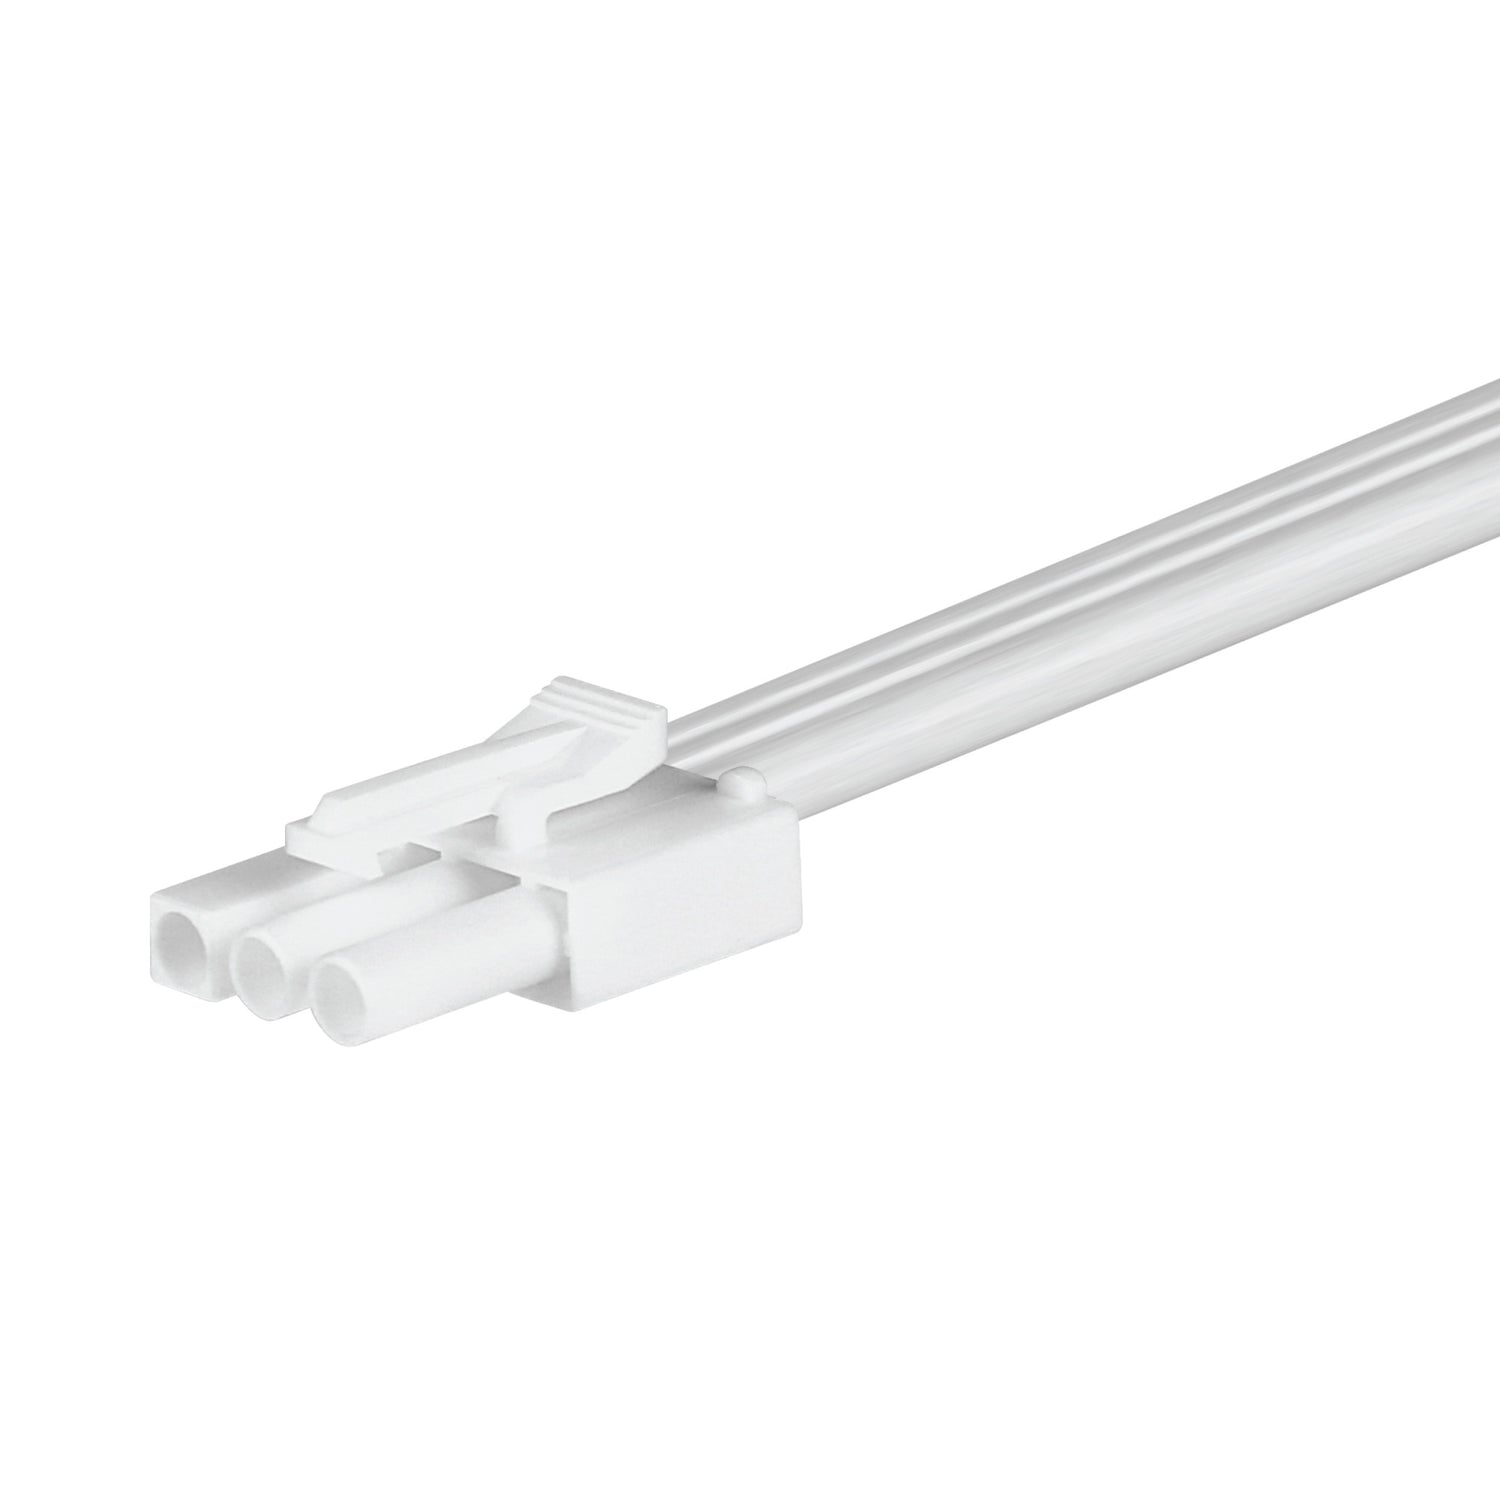 72 in. White OneSync Undercabinet LED Linkable Cable